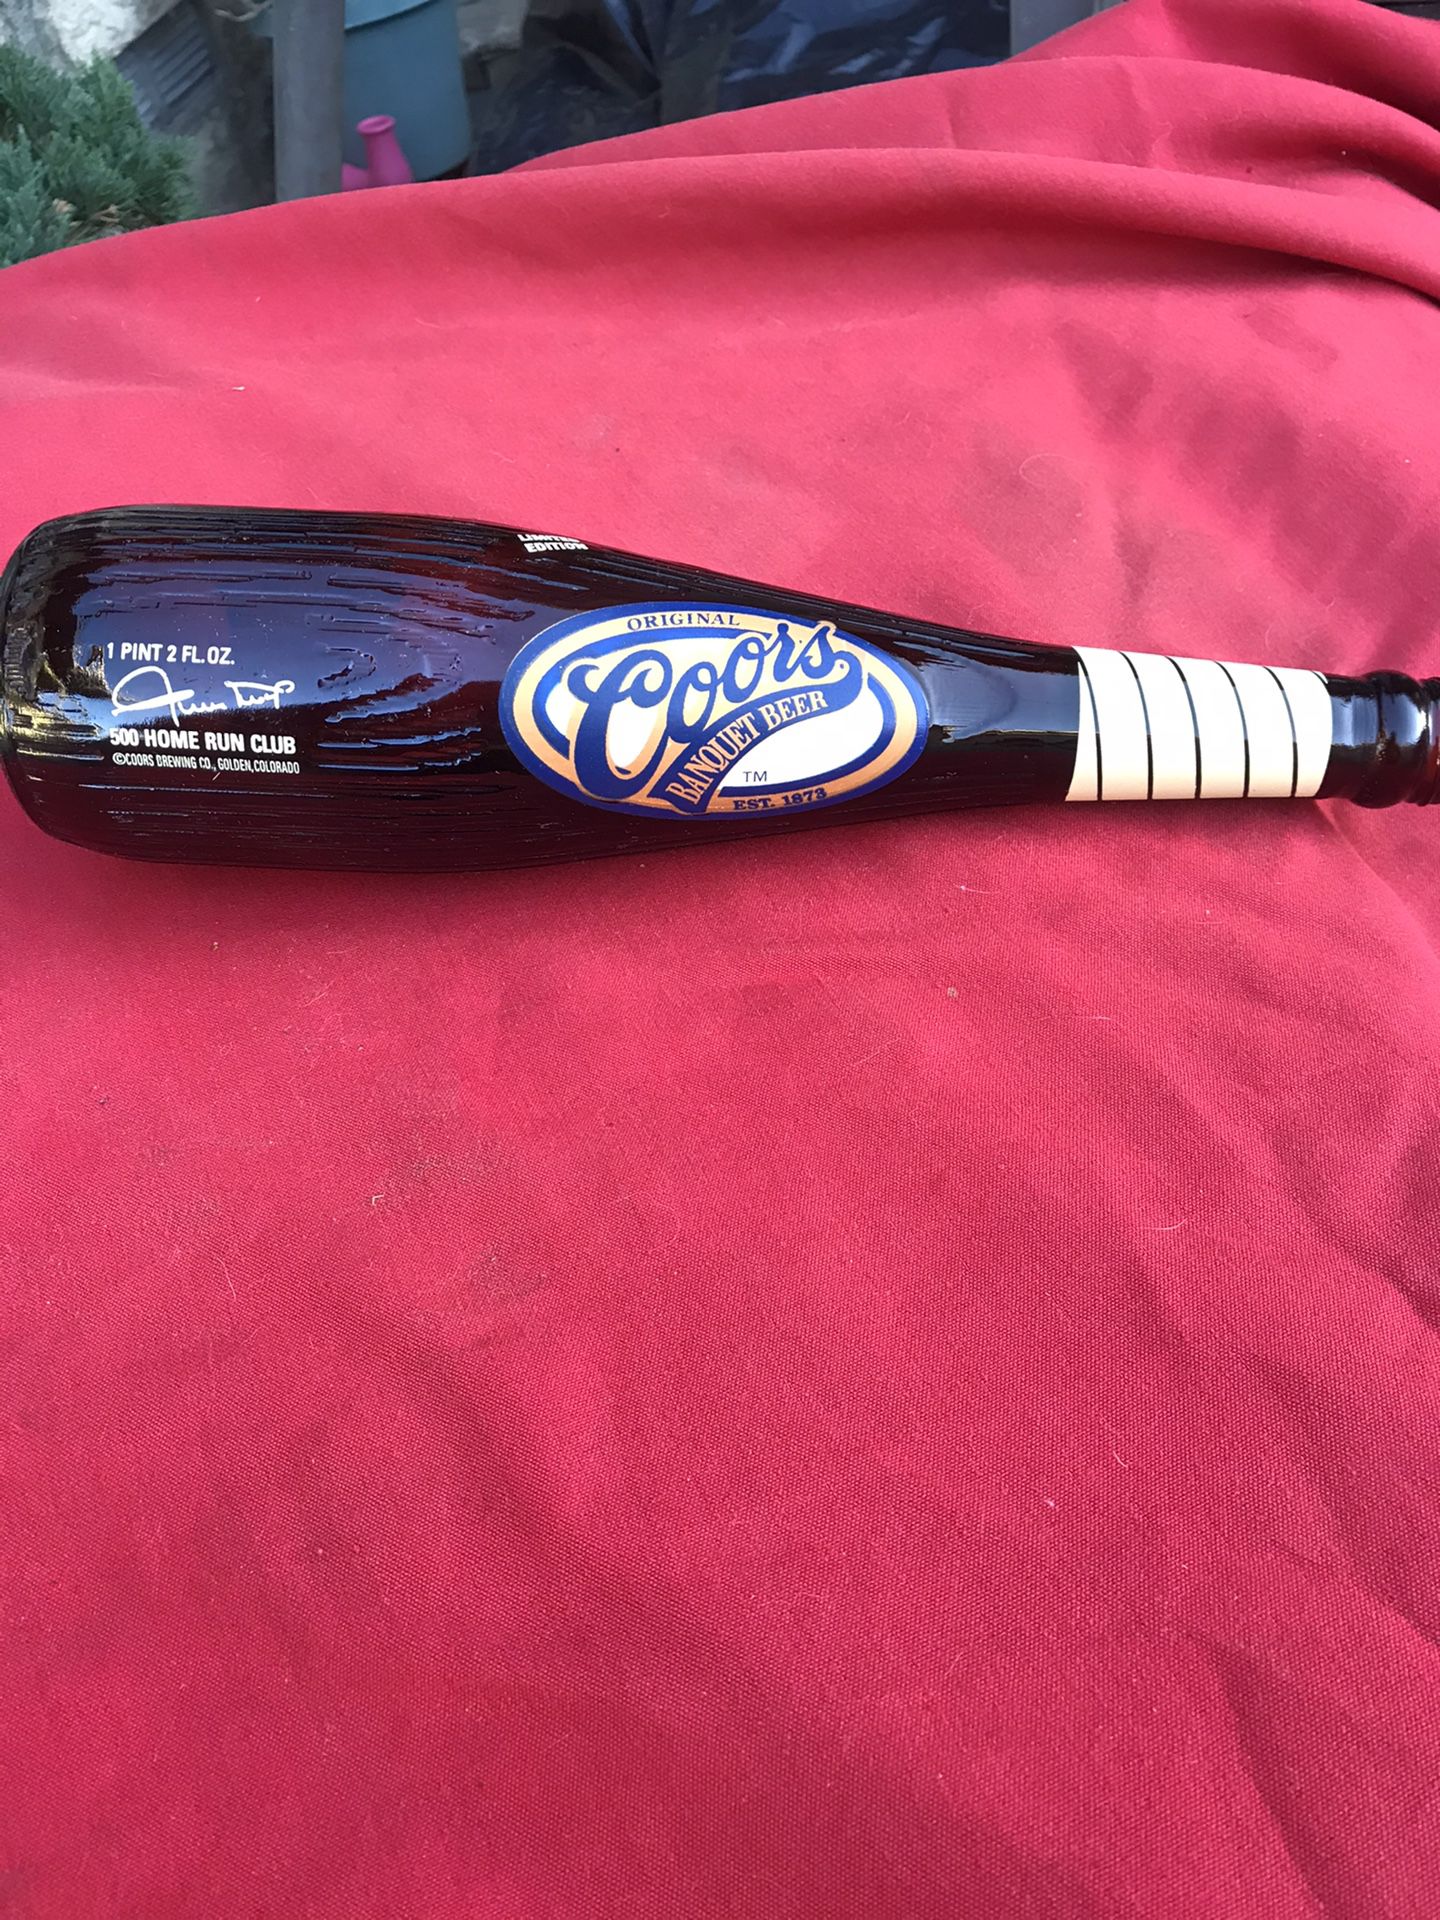 Limited Edition Coors glass bottle bat